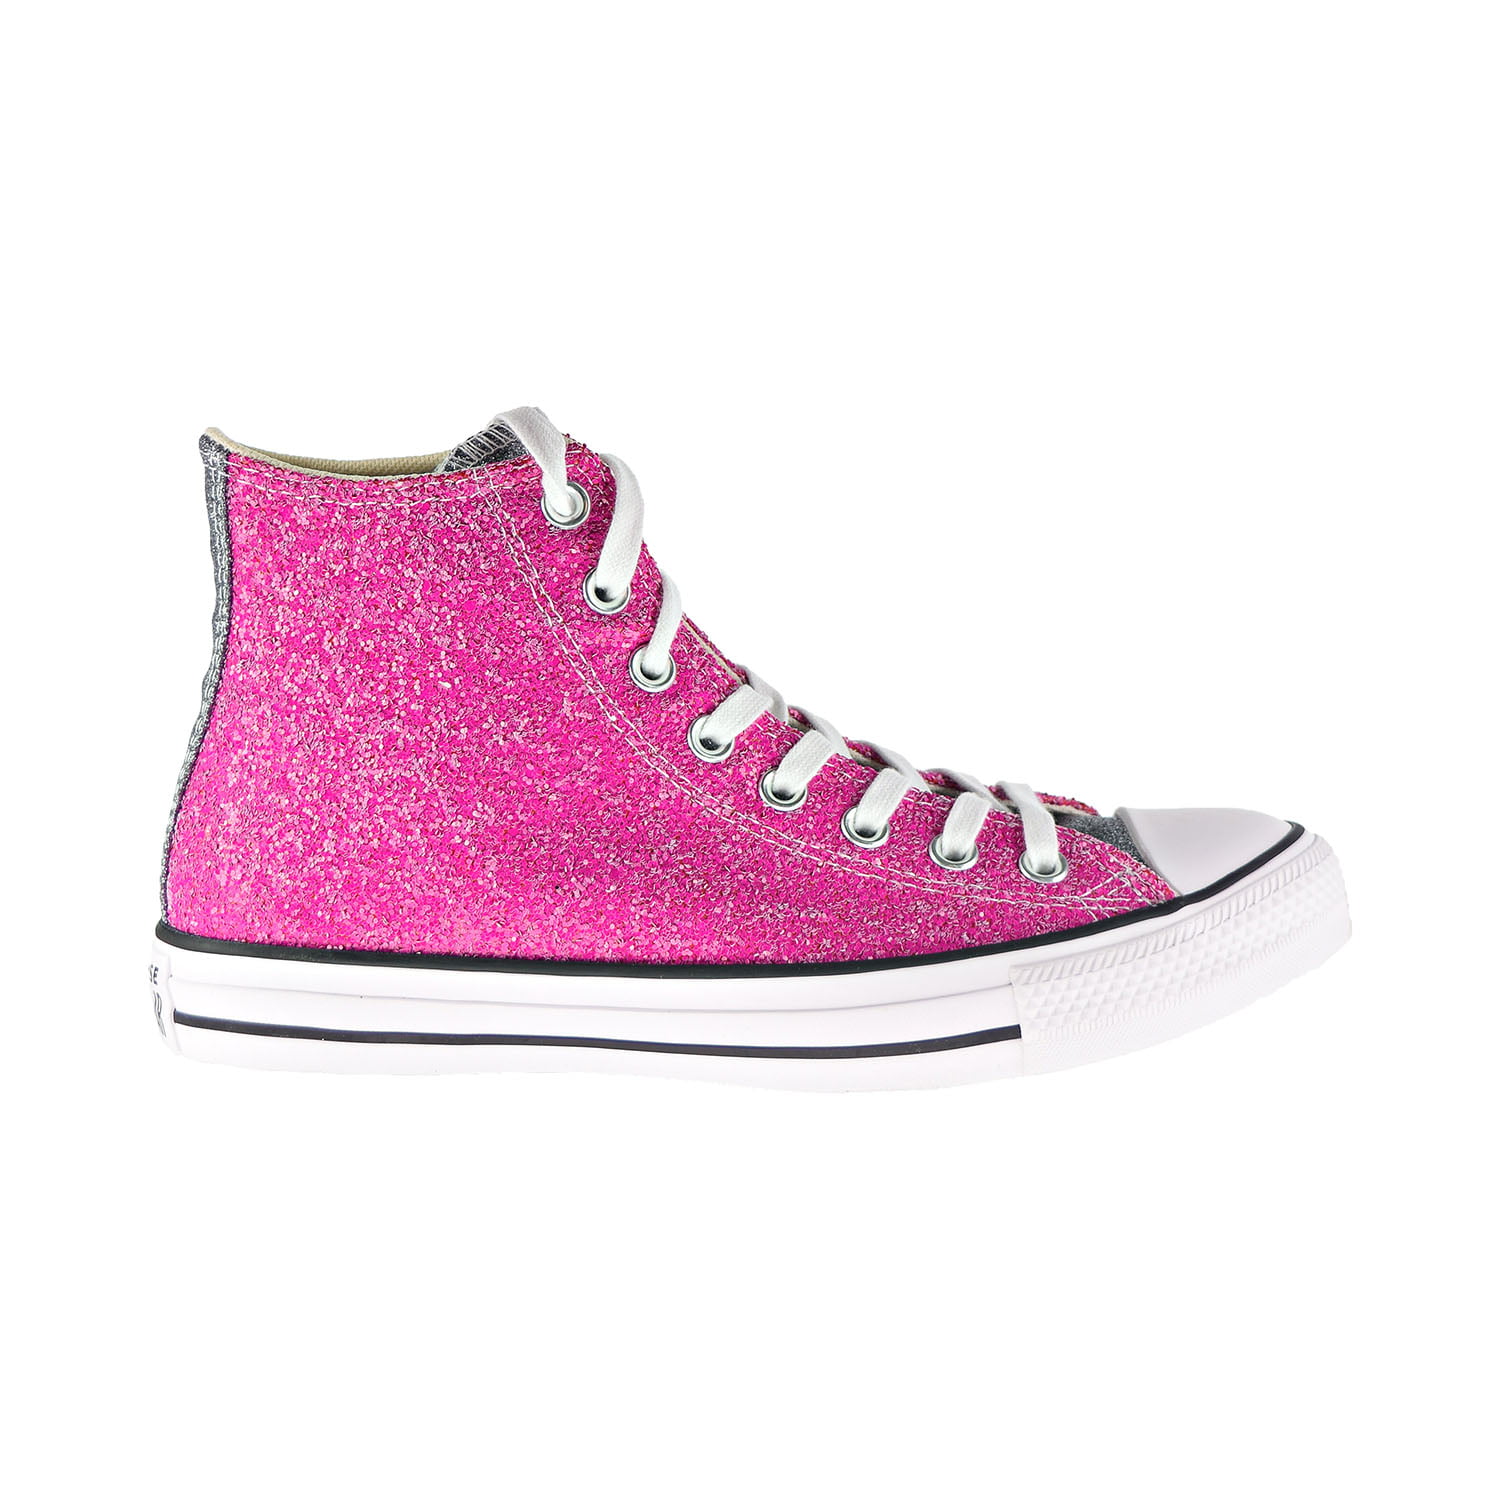 converse all star low dusk pink shimmer shake